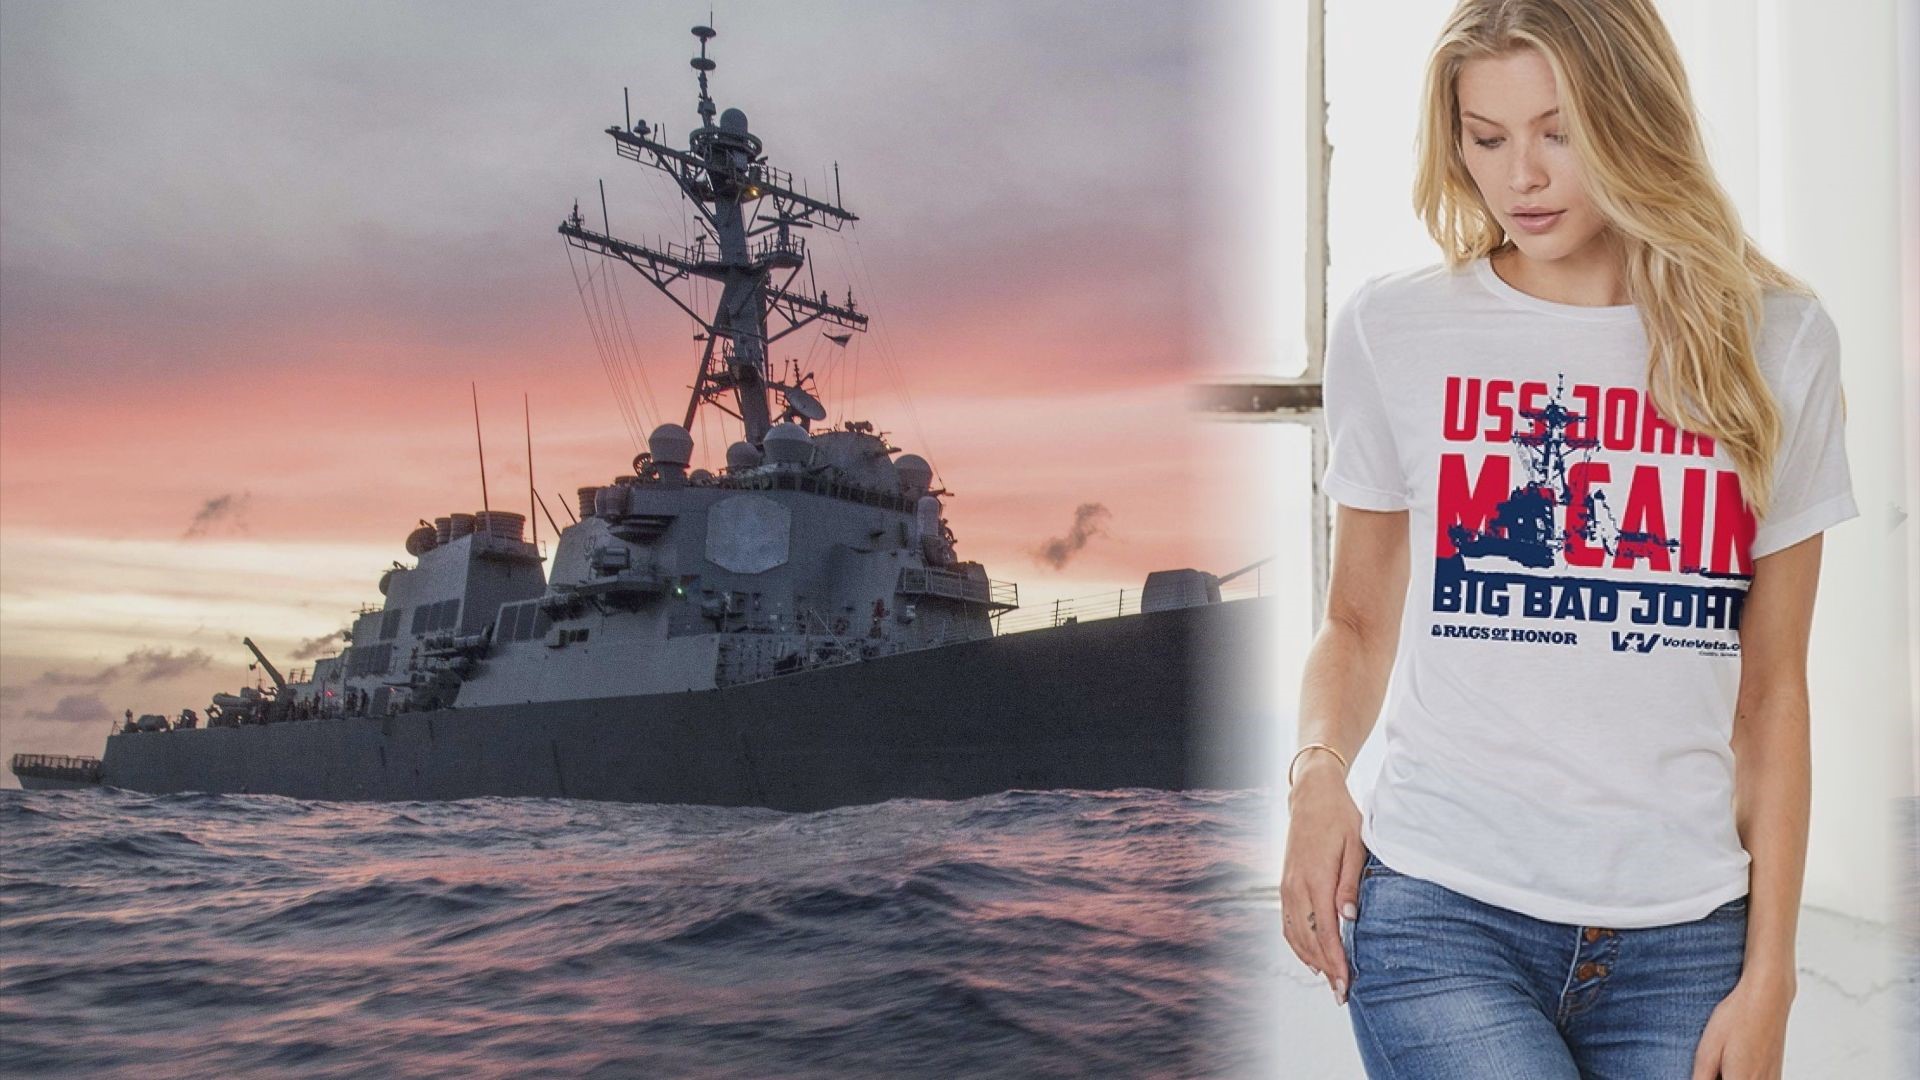 Not everyone is happy with the President's 4th of July plans. Now, there's more drama. It has to do with the battle between the late Senator John McCain and the President. Veterans' groups plan to send a message about all this -- using these T-shirts.